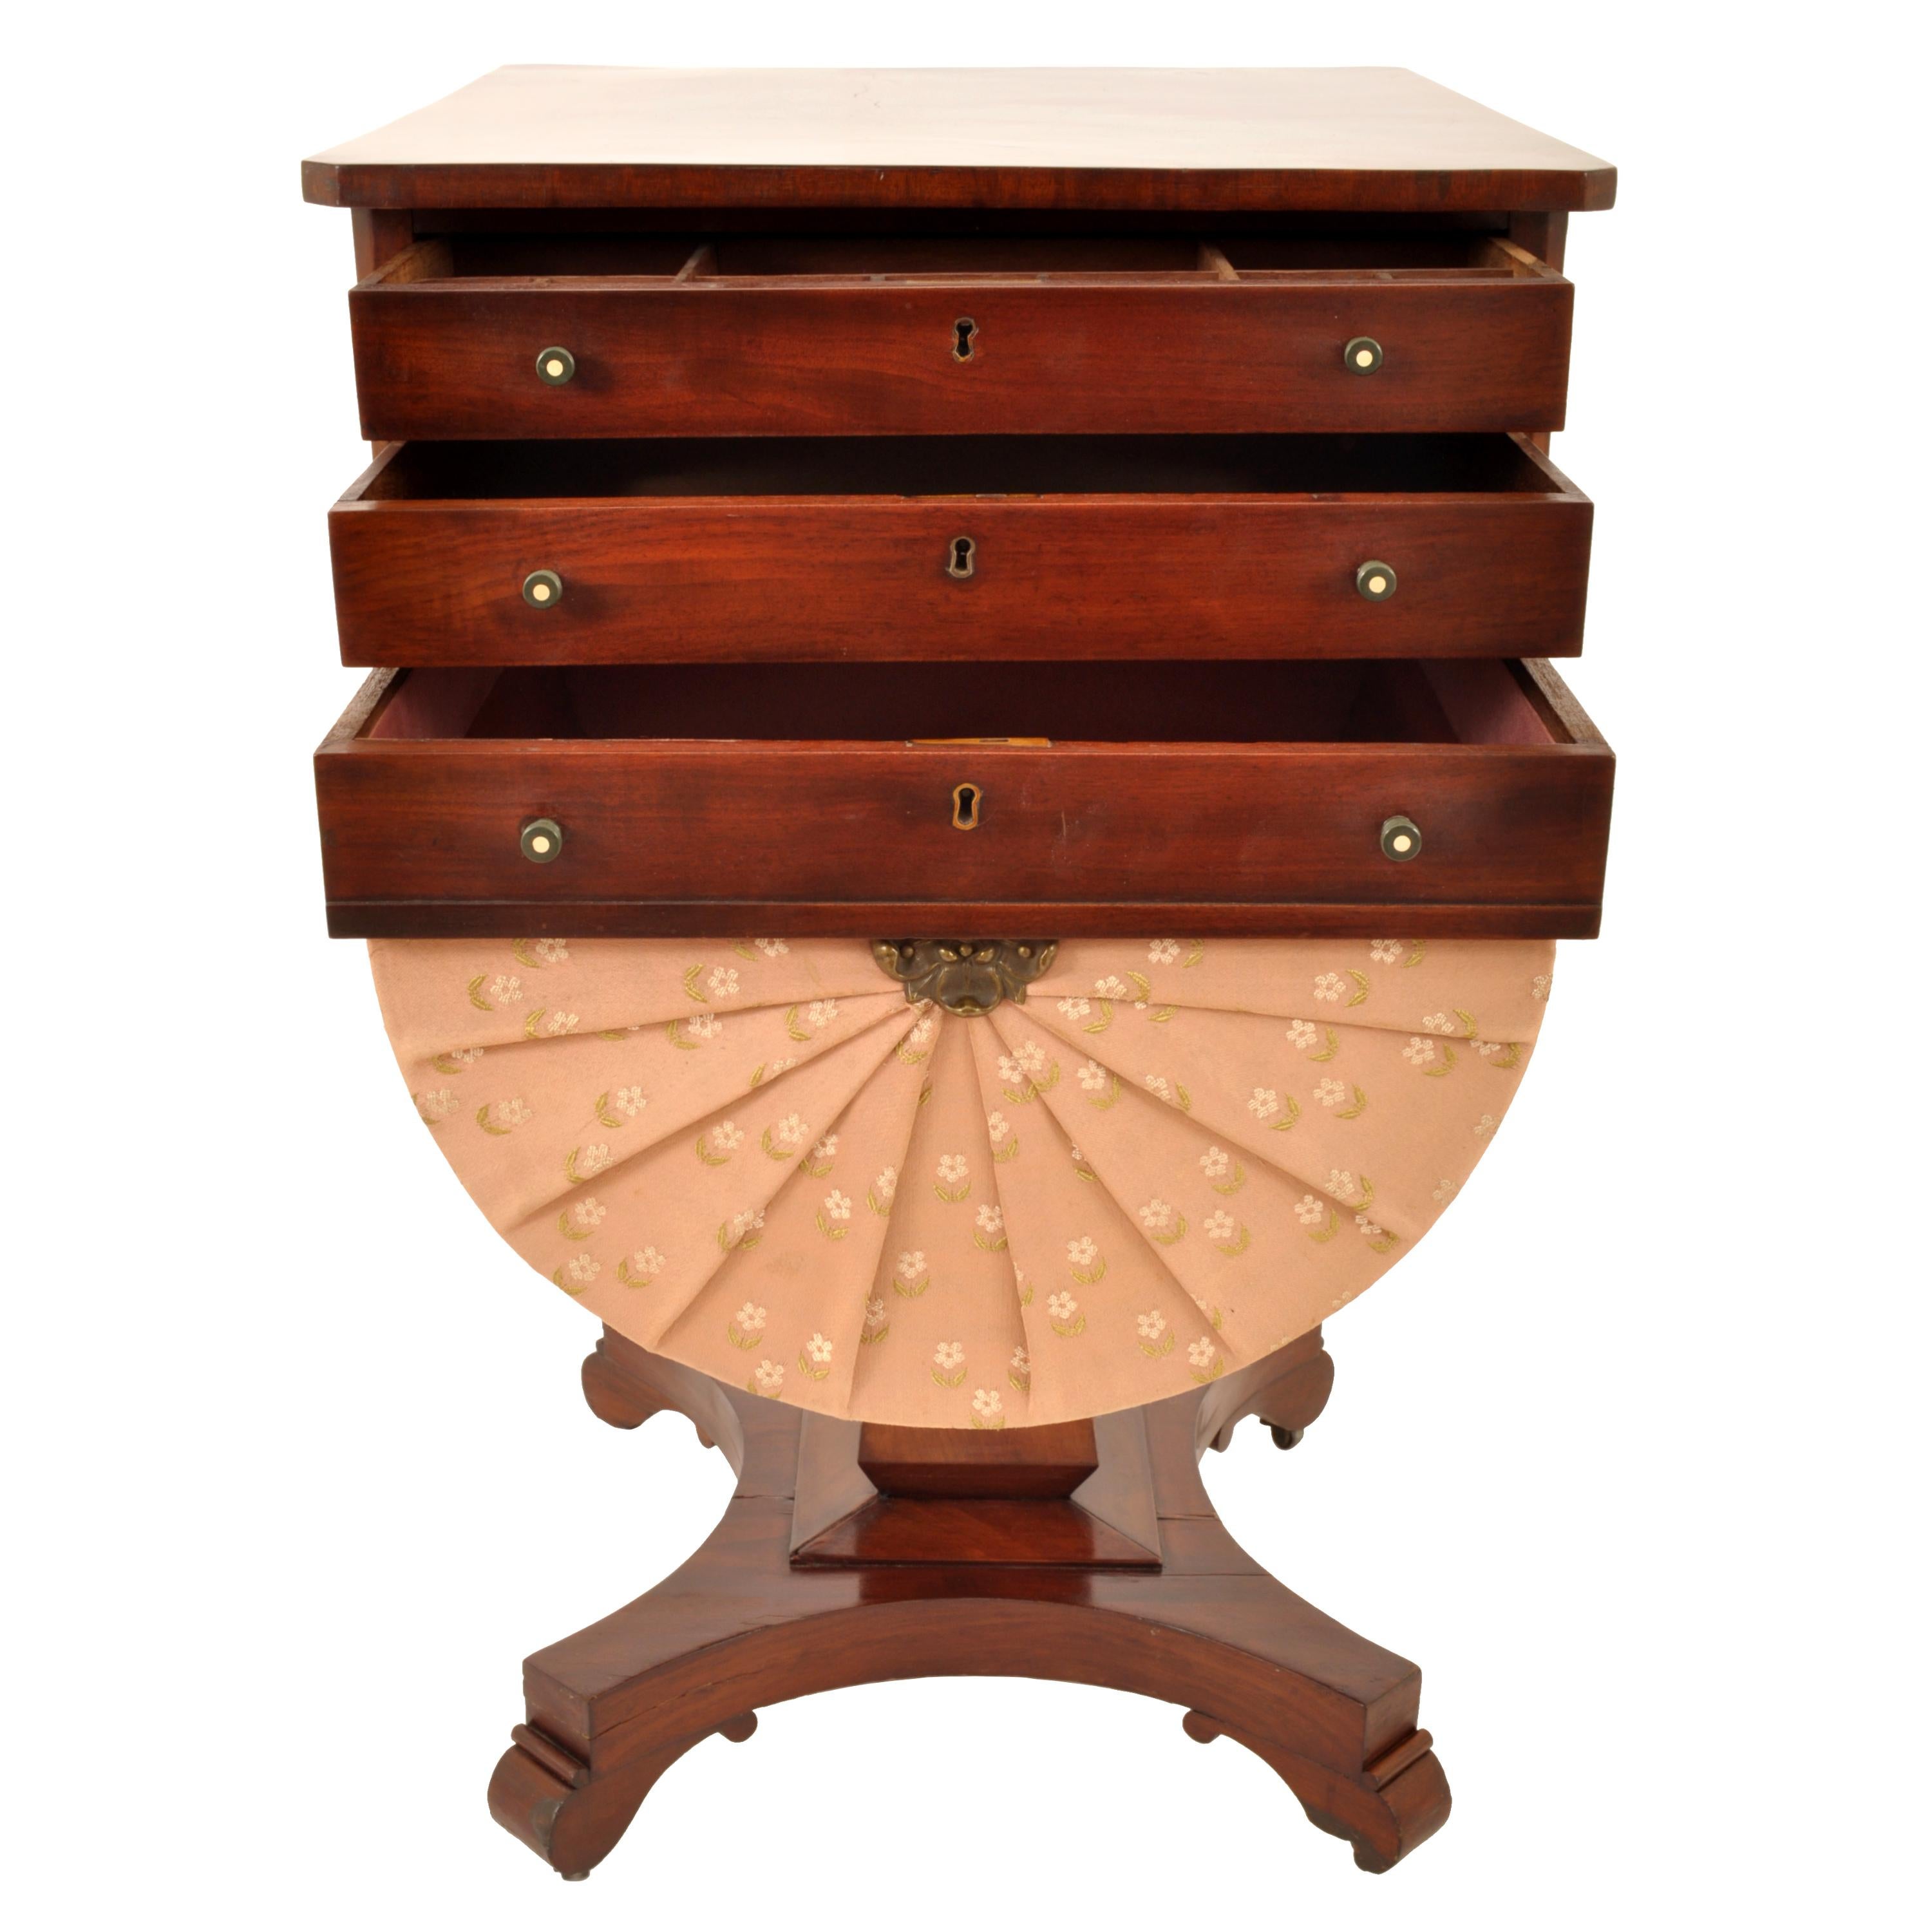 Antique American Empire Mahogany Pedestal Sewing Work Table New York Circa 1840 In Good Condition For Sale In Portland, OR